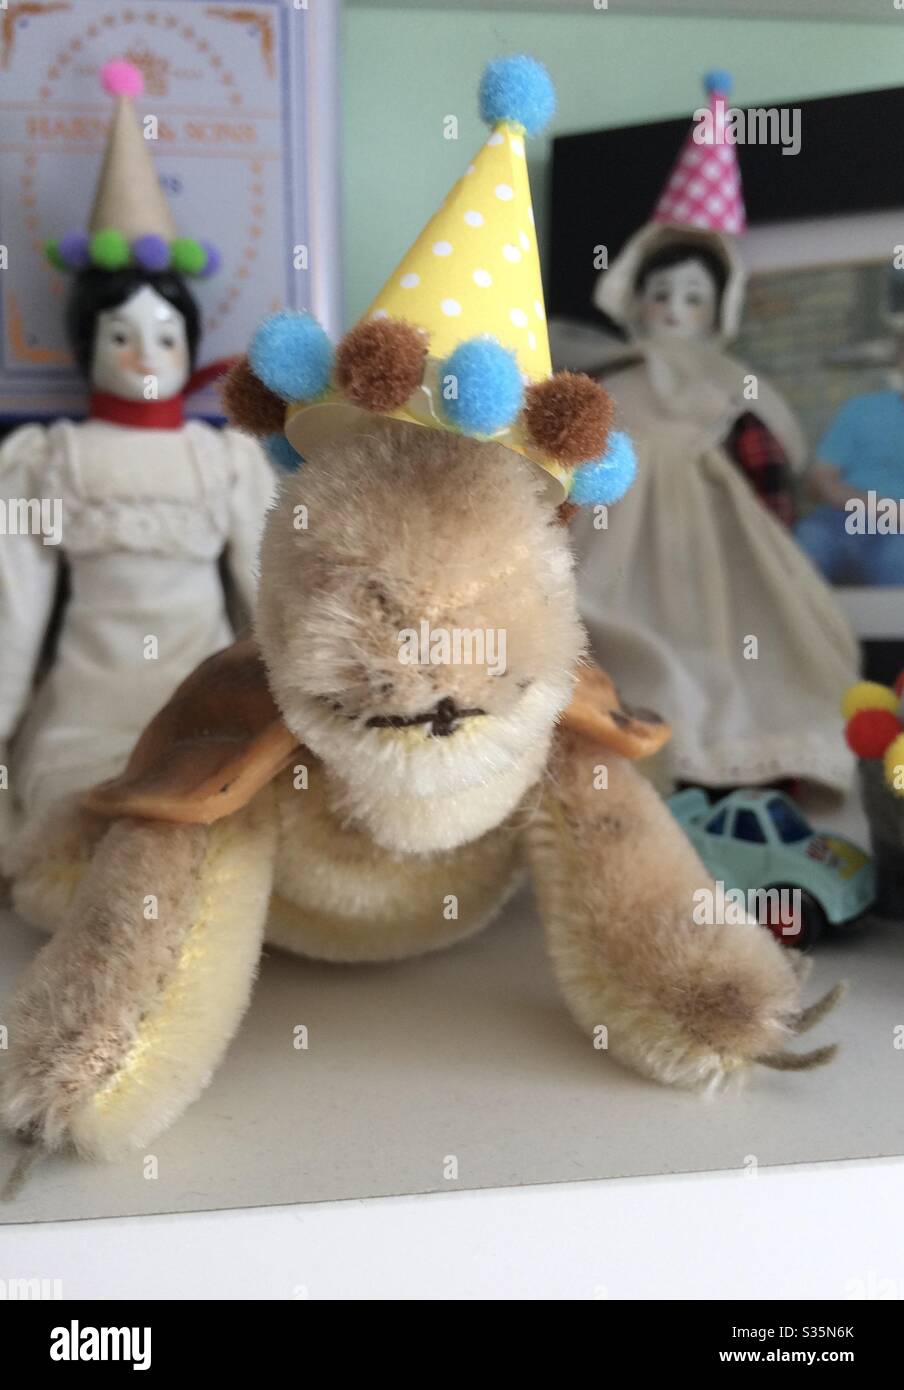 Turtle stuffed animal in a party hat Stock Photo